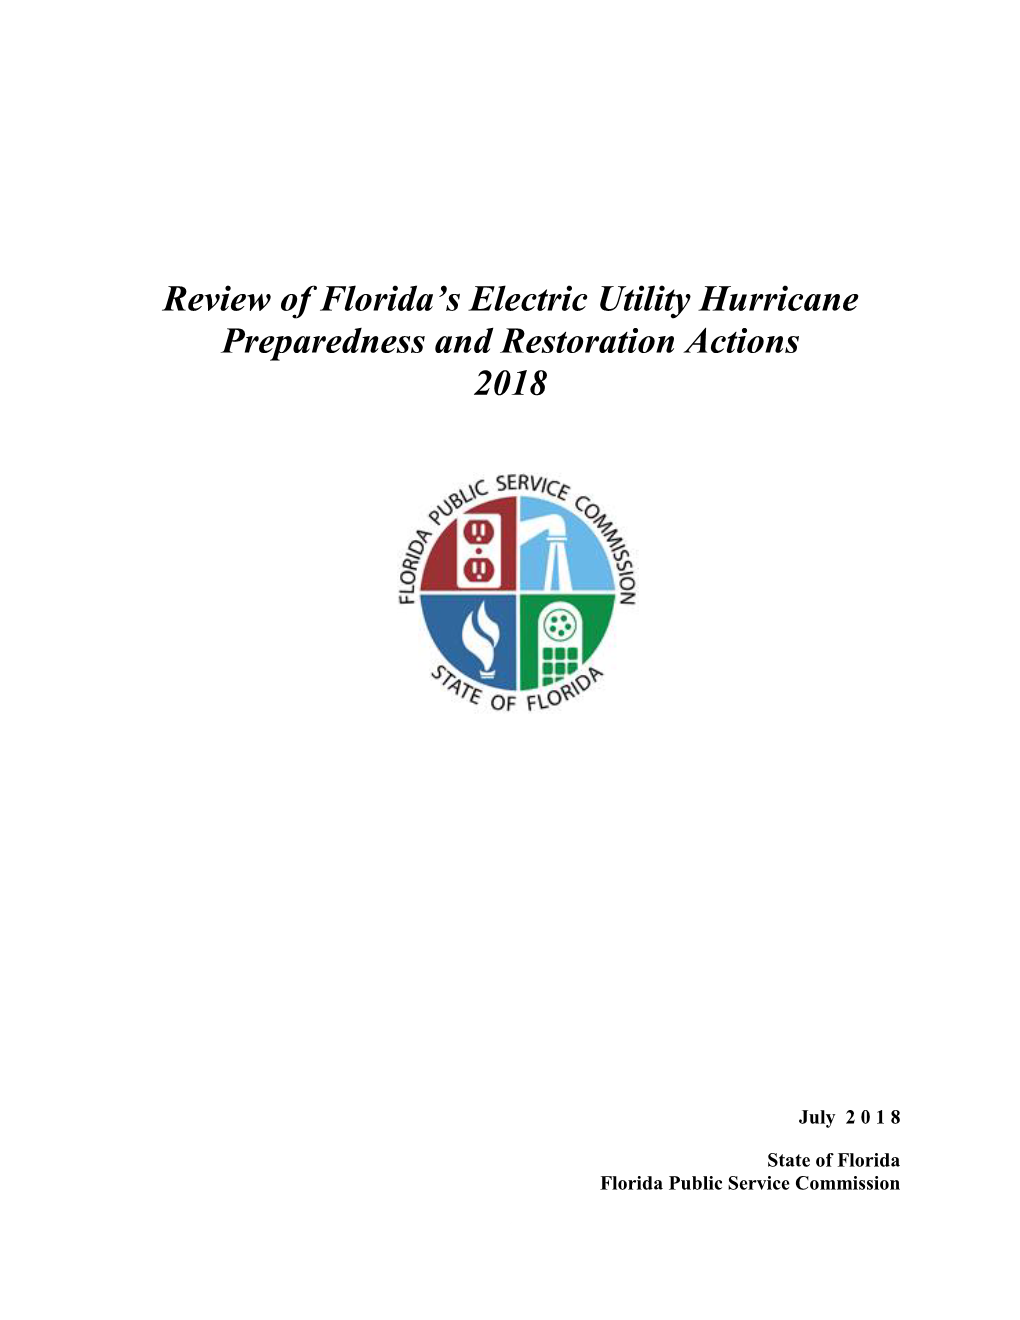 Review of Florida's Electric Utility Hurricane Preparedness And